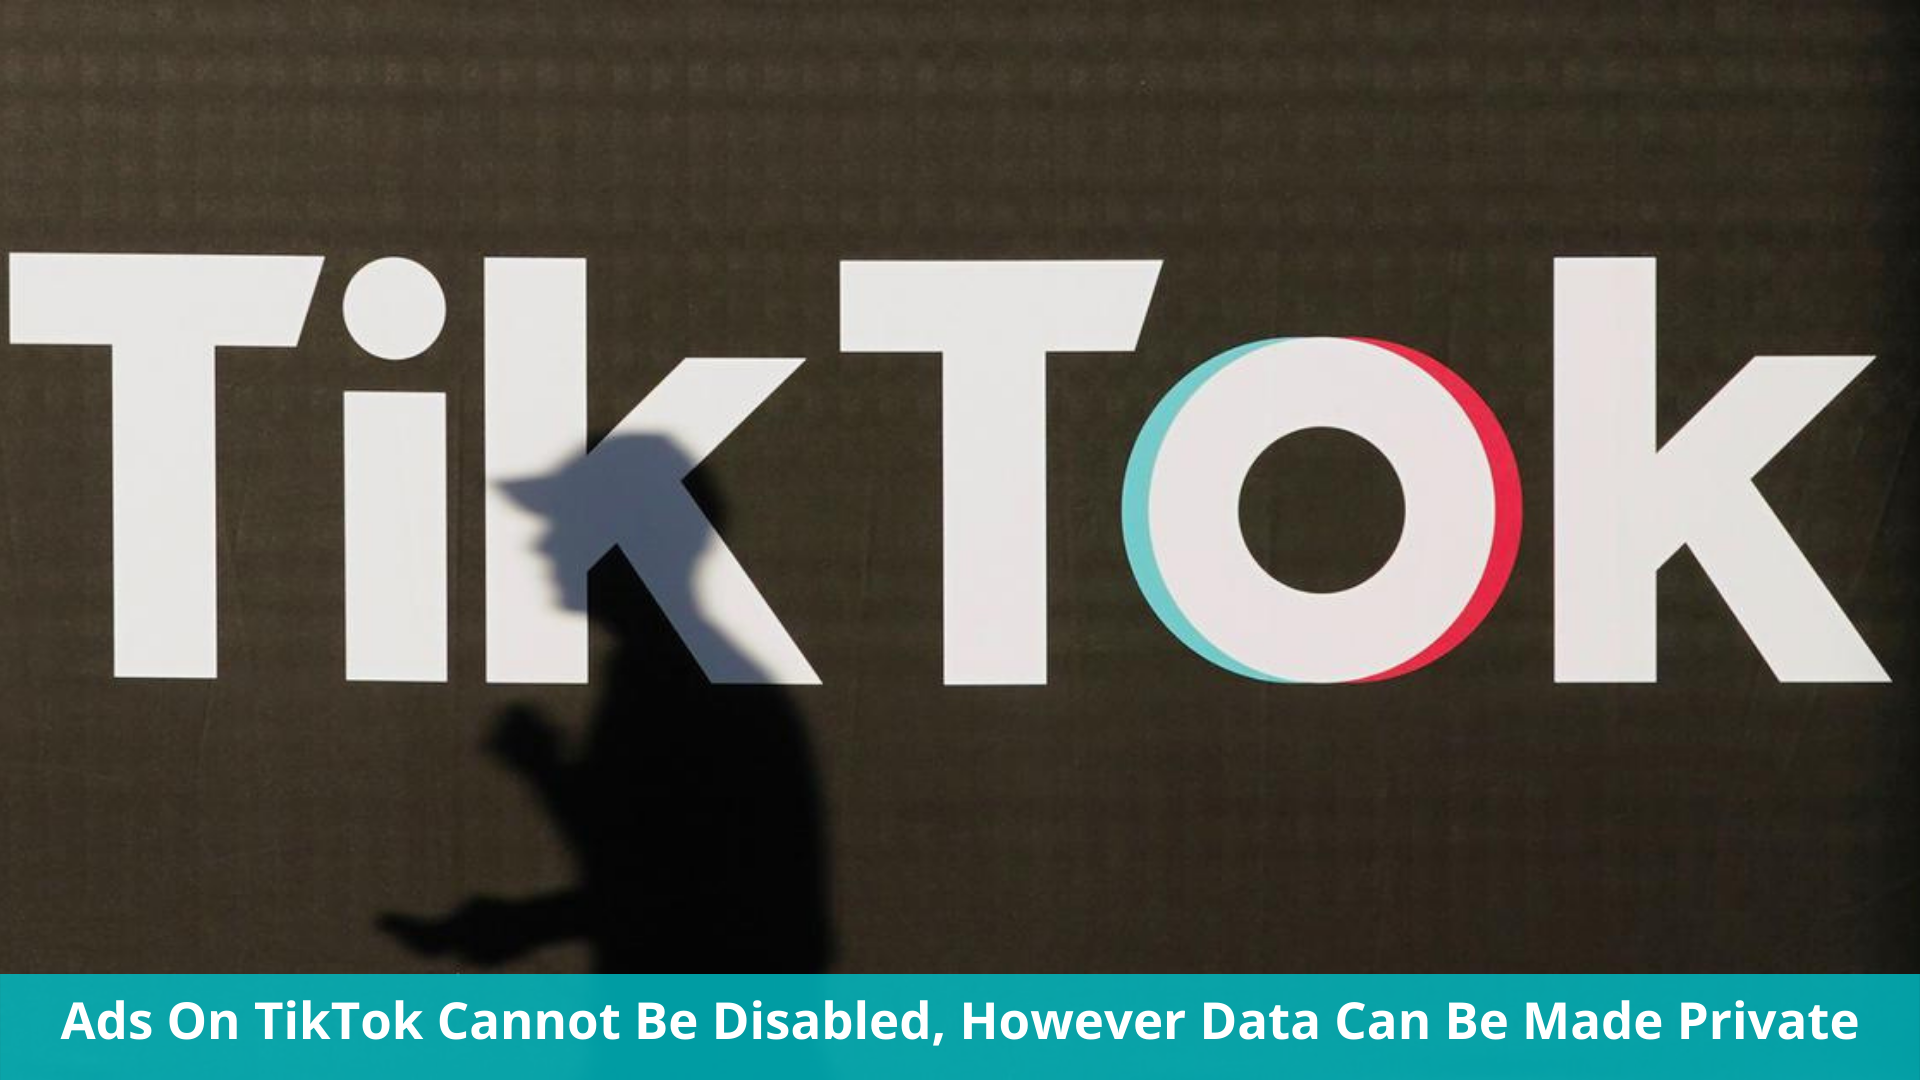 Ads on TikTok cannot be disabled, however data can be made private